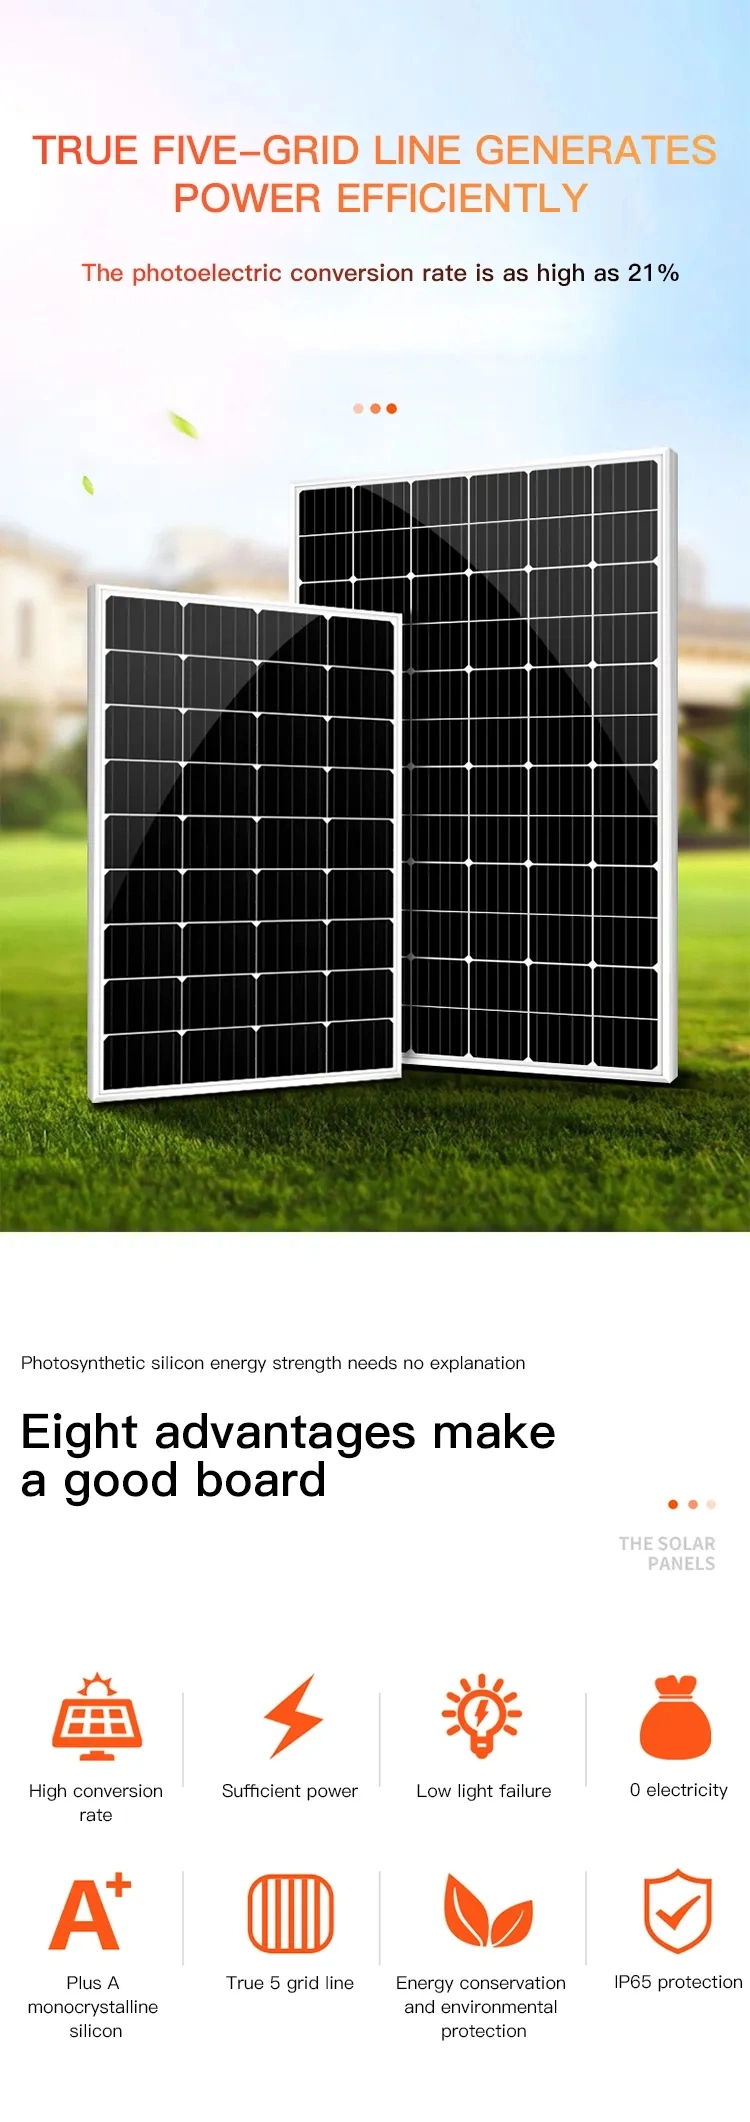 China 1kw 2kw 3kw 4kw 5kw 10kw 15kw Industrial Solar Panel off Grid Price Buy Solar Home Power Energy System